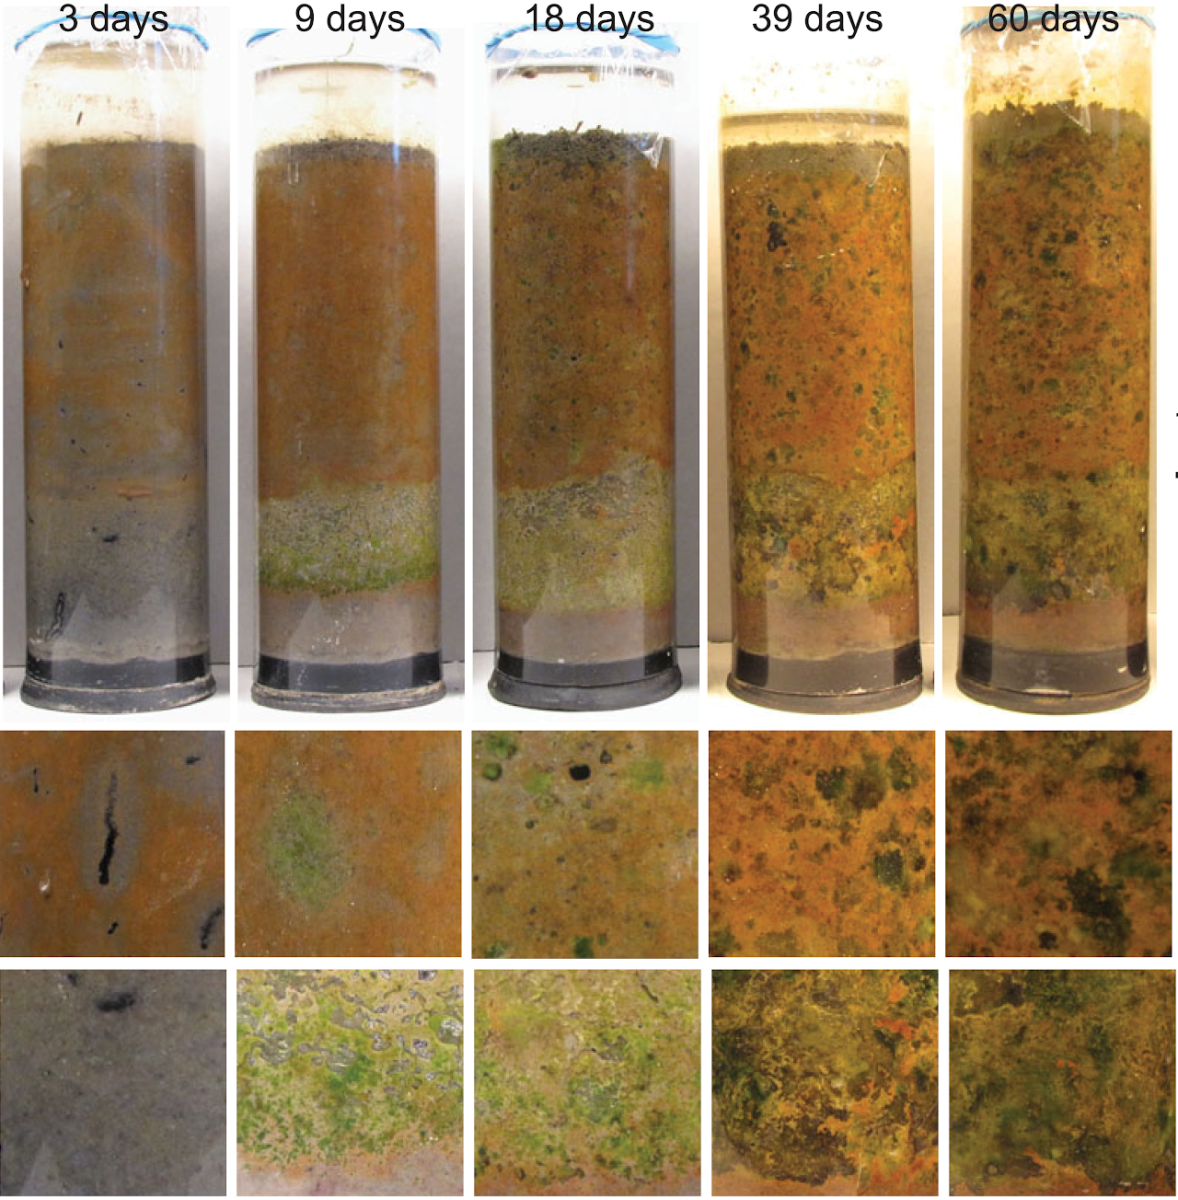 An image of a Winogradsky column of microbes evolving over time